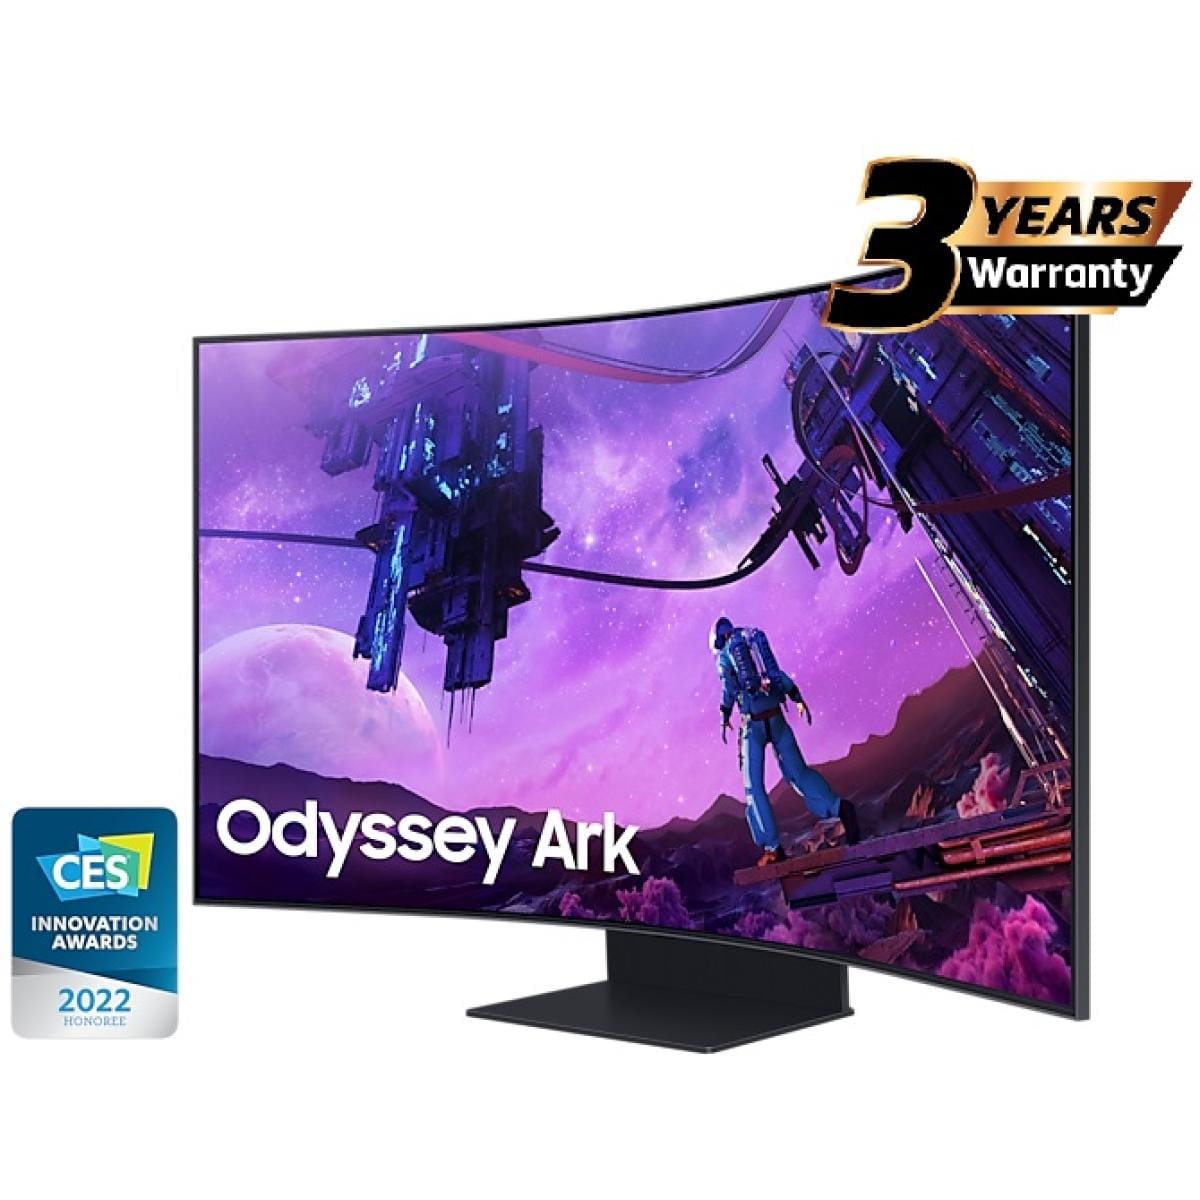 SAMSUNG Computer Monitors Samsung Odyssey ARK Smart 55" 4K UHD Curved Quantum Matrix Mini-Led, 165Hz 1ms(GTG), HDR 2000, 95% DCI Coverage PRO Colors, FreeSync Premium Pro, w/ Dolby Atmos Speakers & HAS Stand